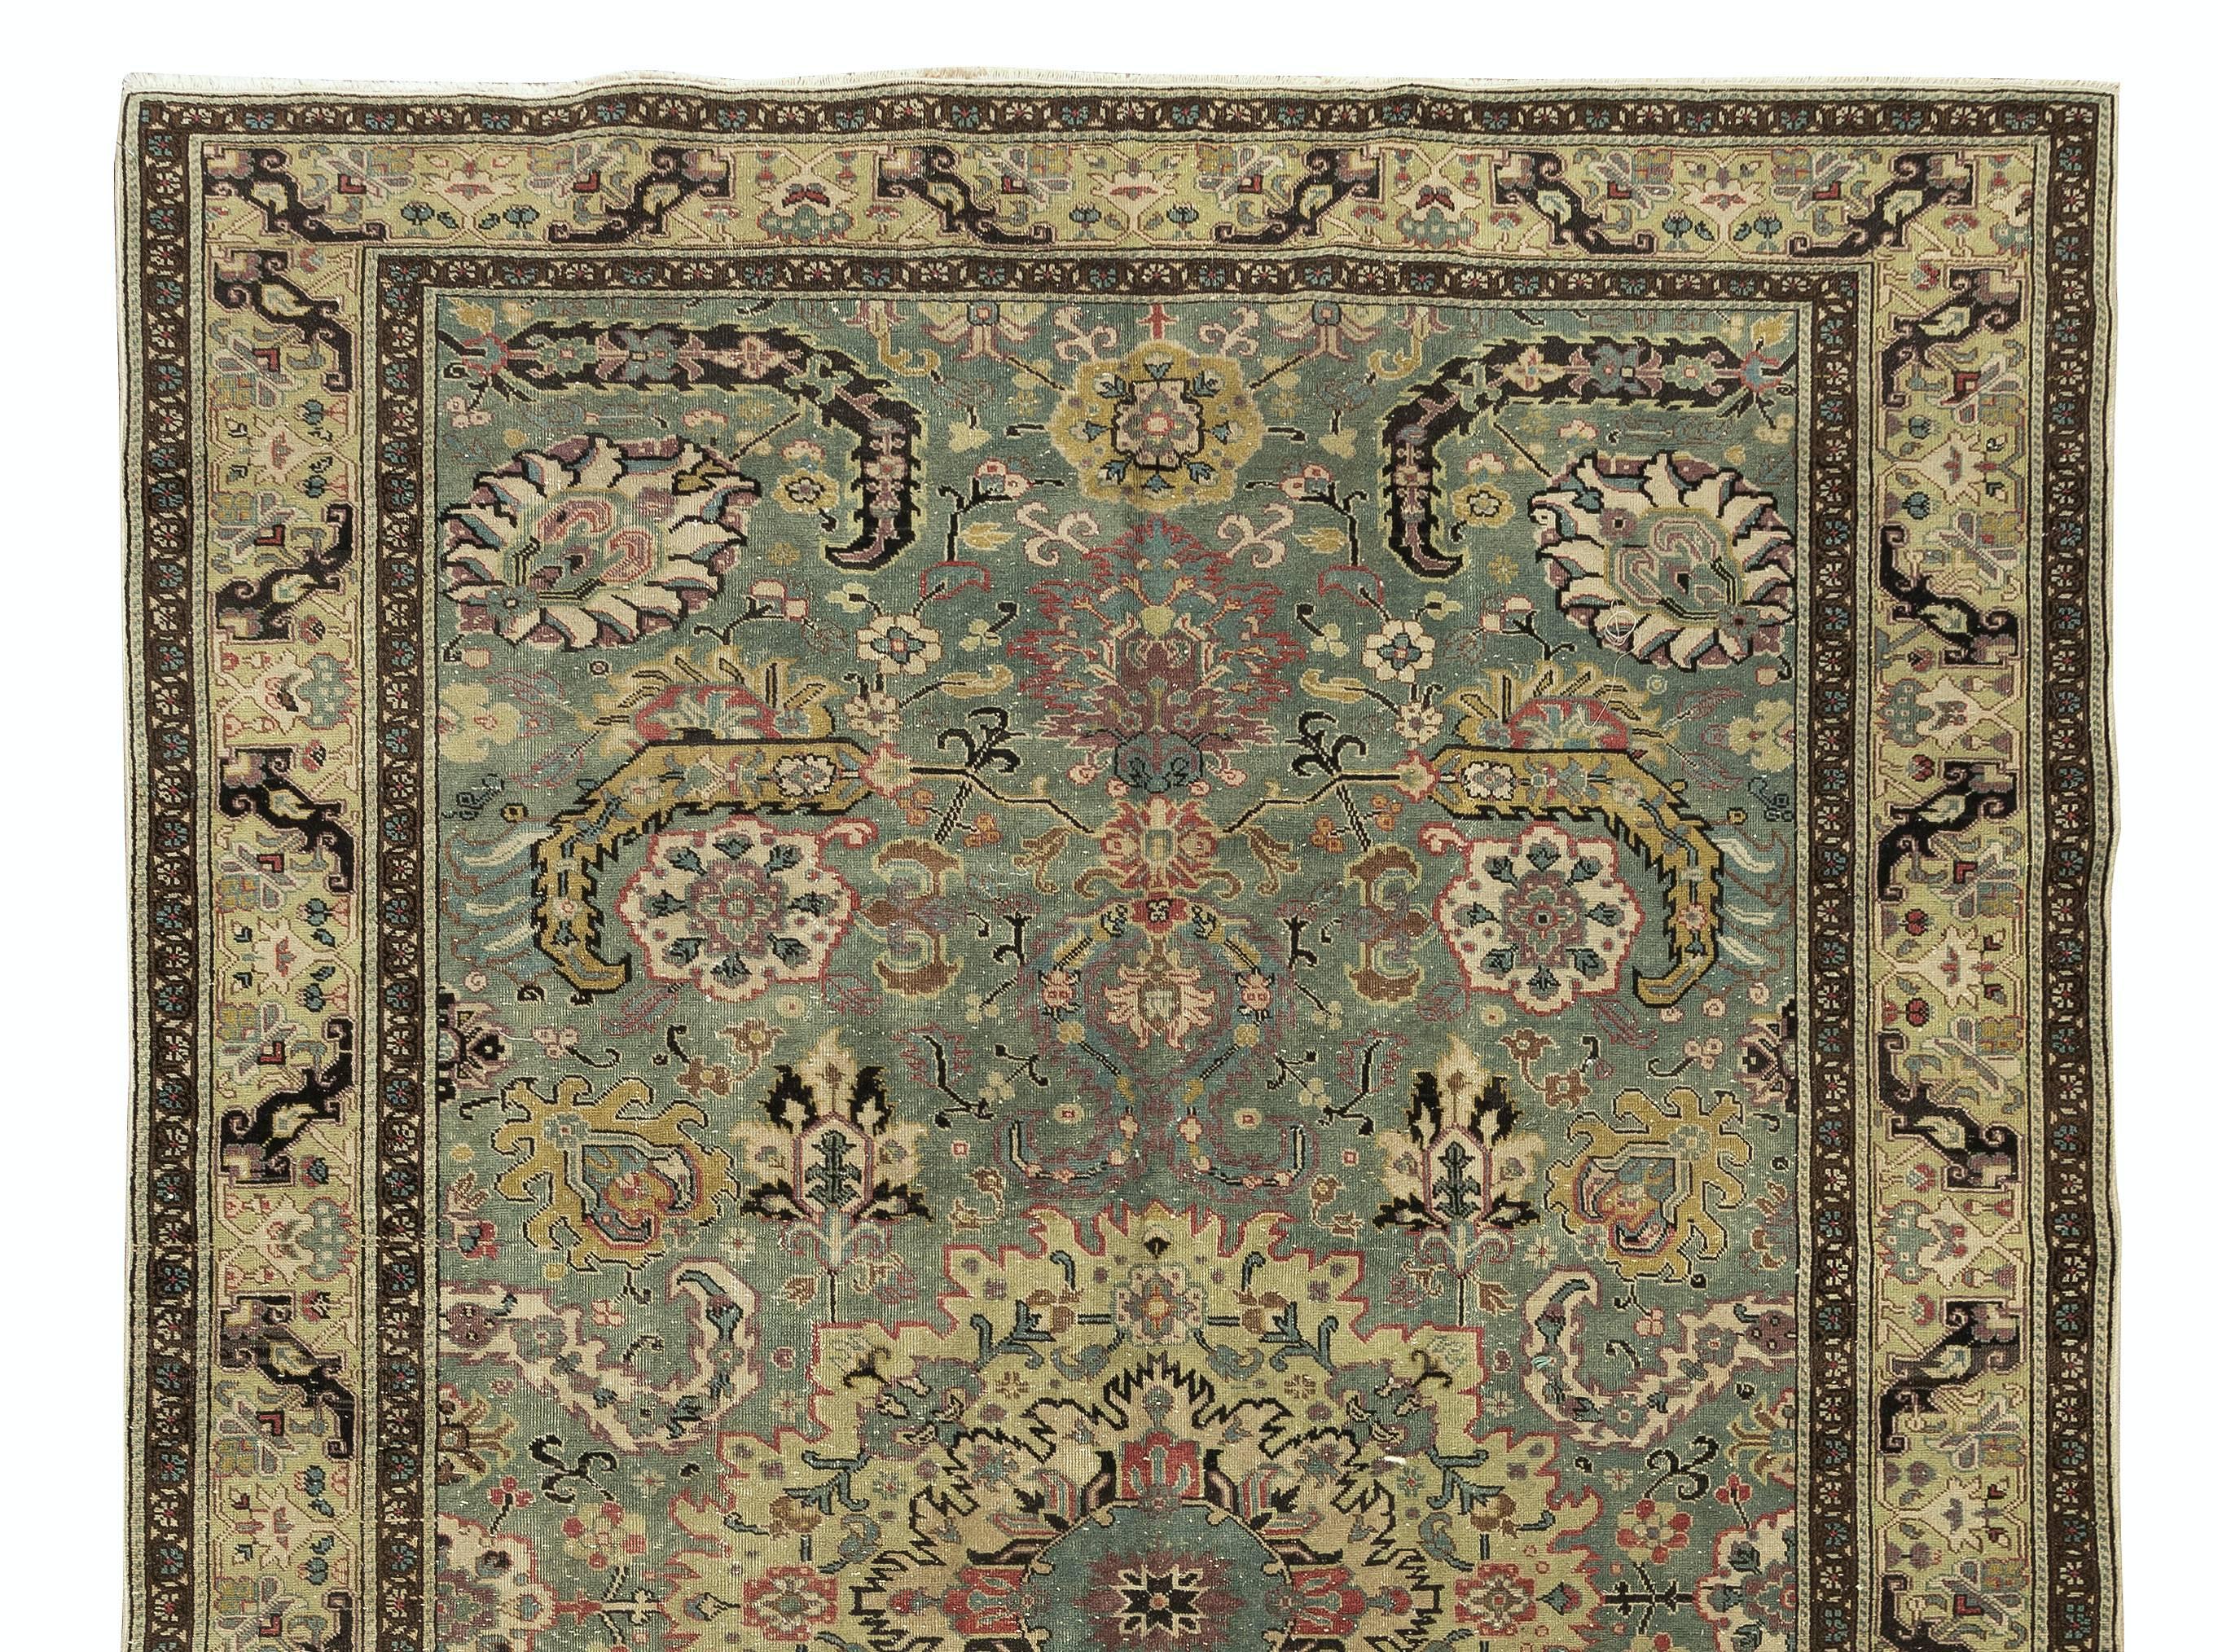 Hand-Knotted 6.3x10 Ft Semi Antique Turkish Area Rug. Finely Handknotted Wool Oriental Carpet For Sale